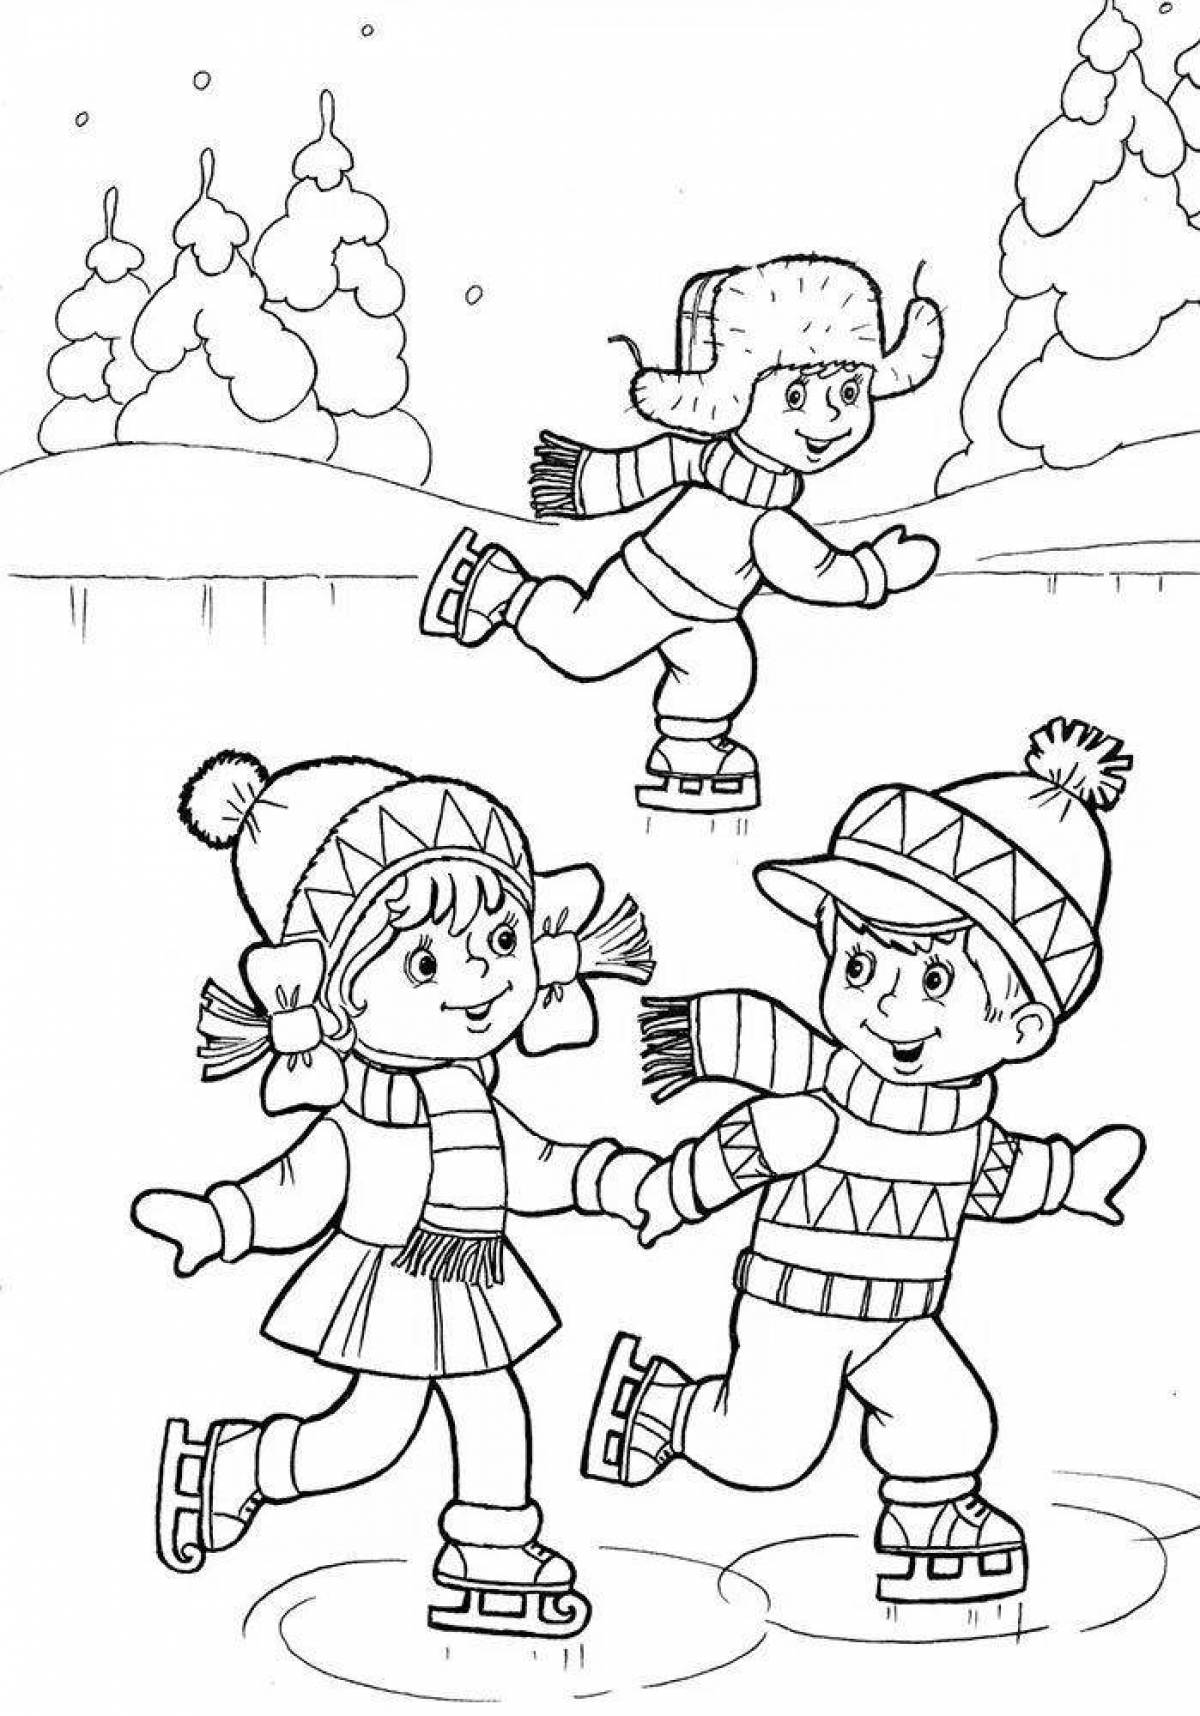 Rough winter fun coloring page